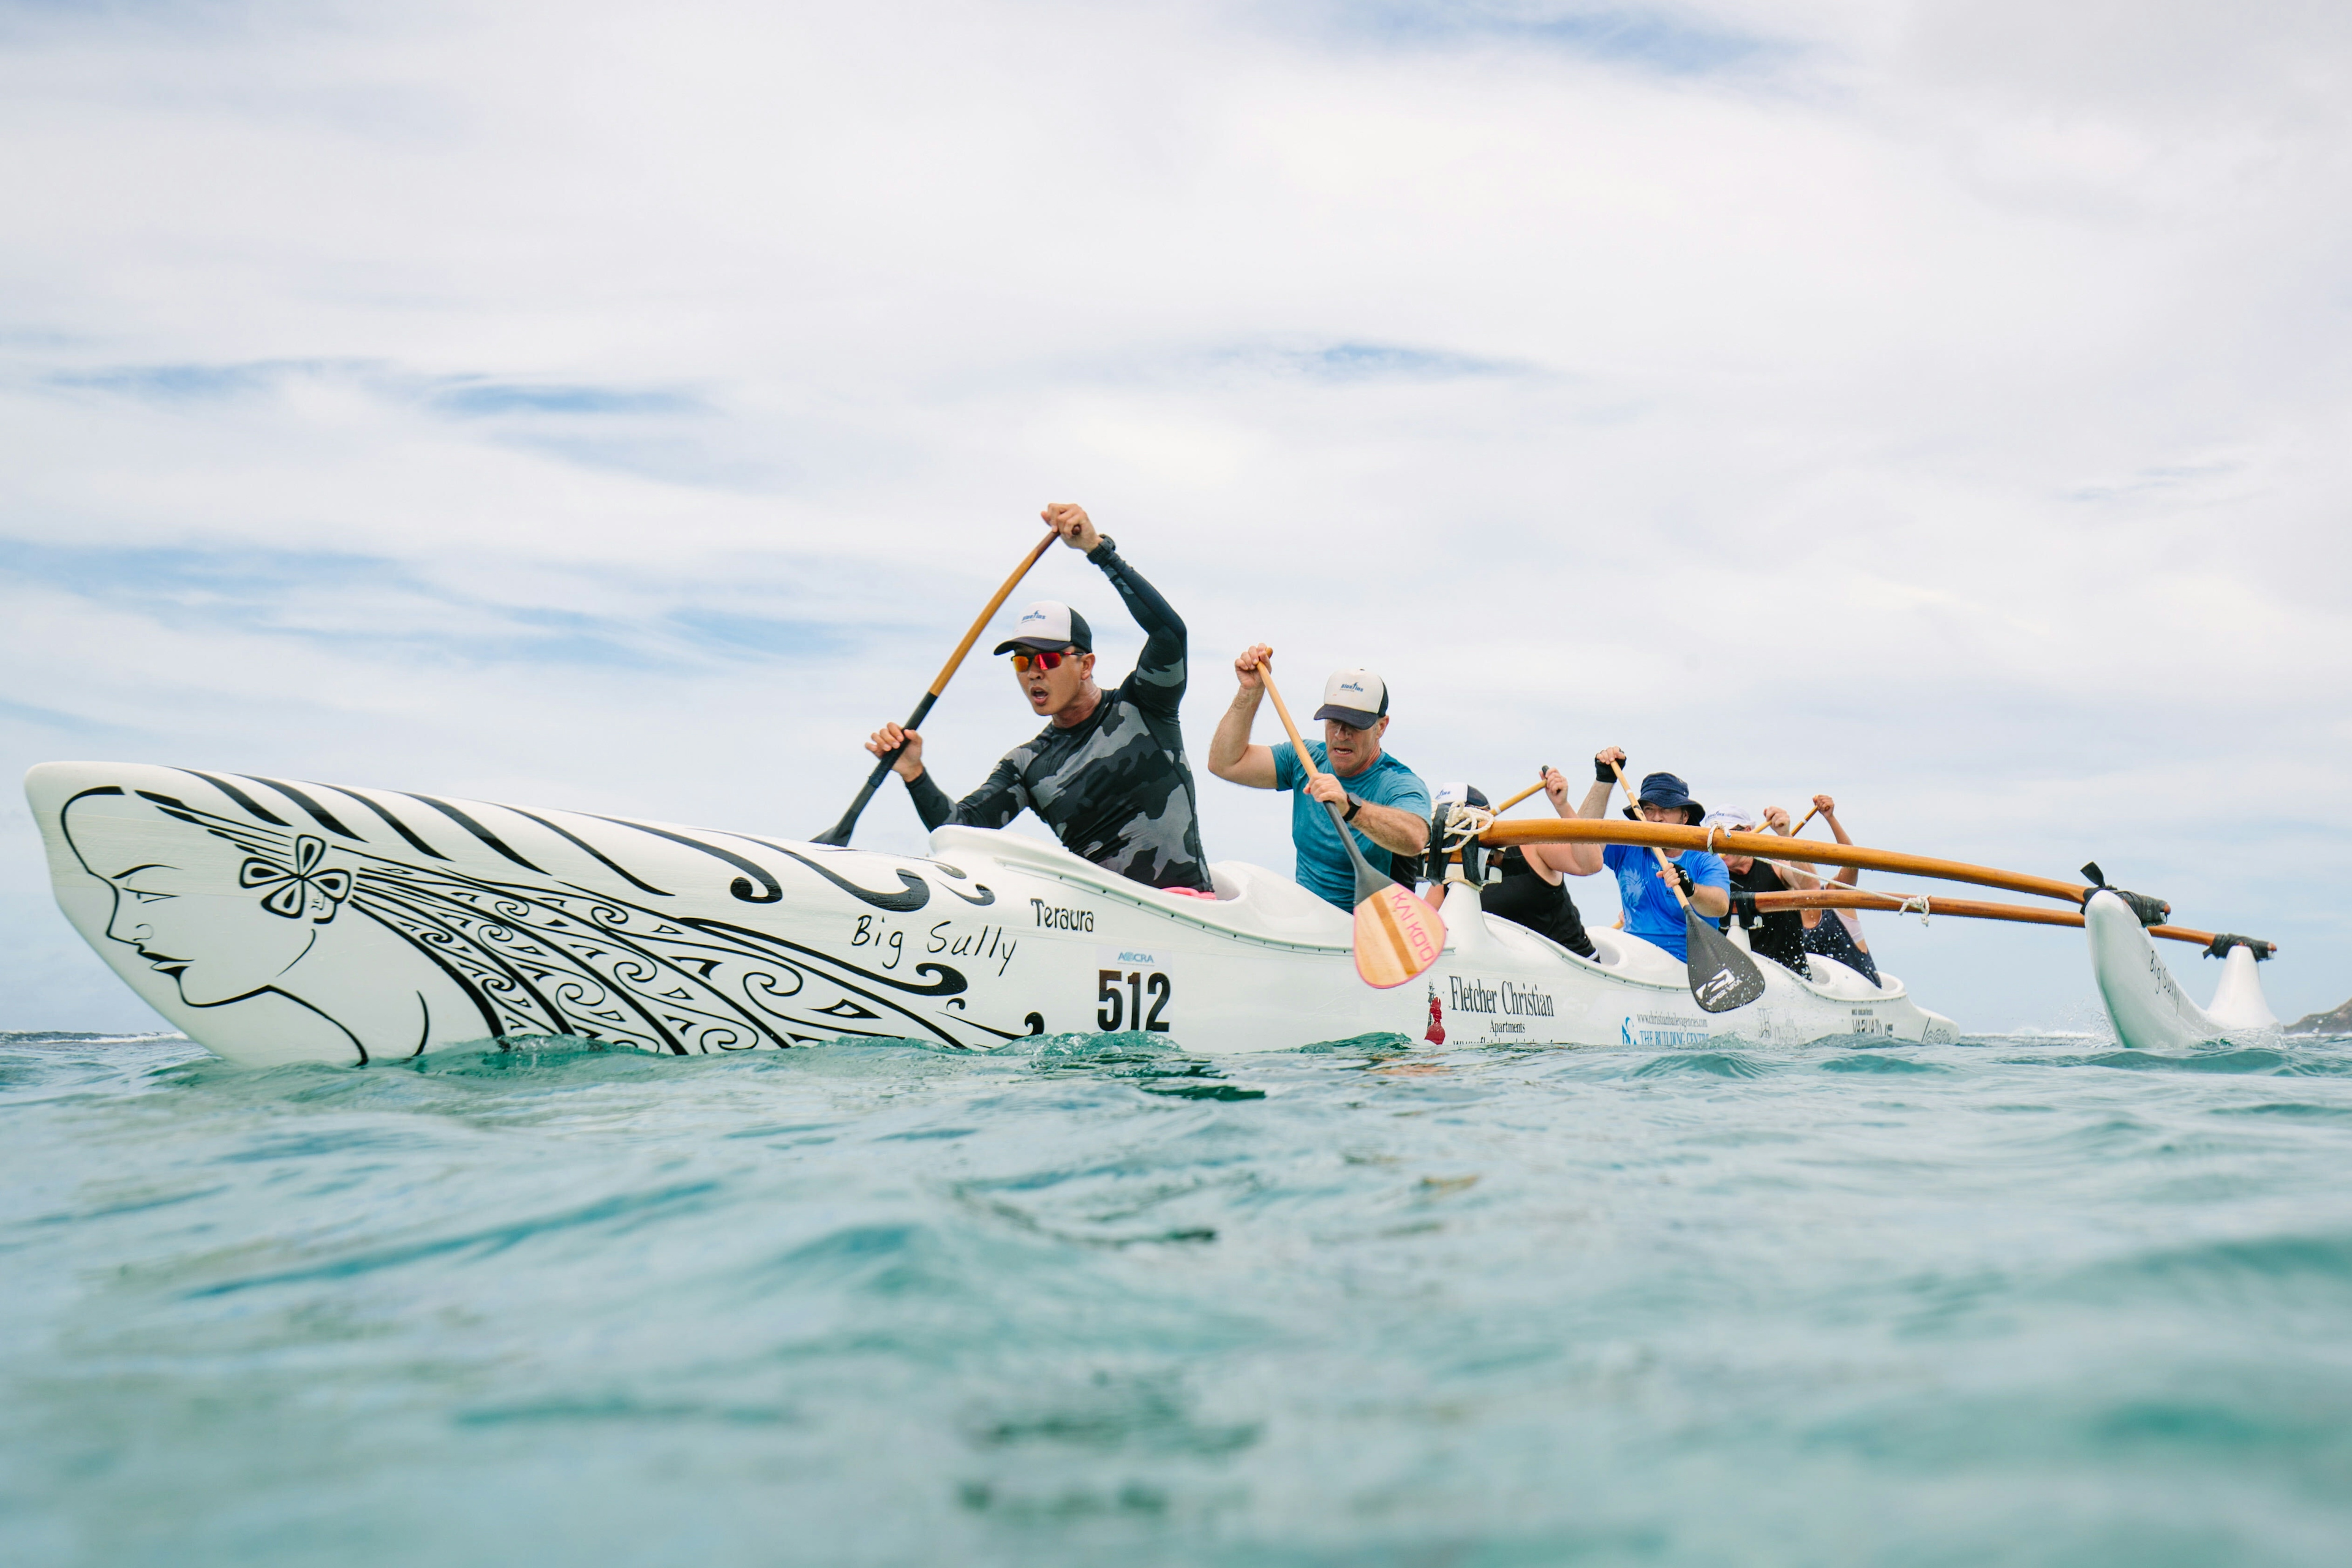 Bluefins Dragon Boat & Outrigger Canoeing Club hero image